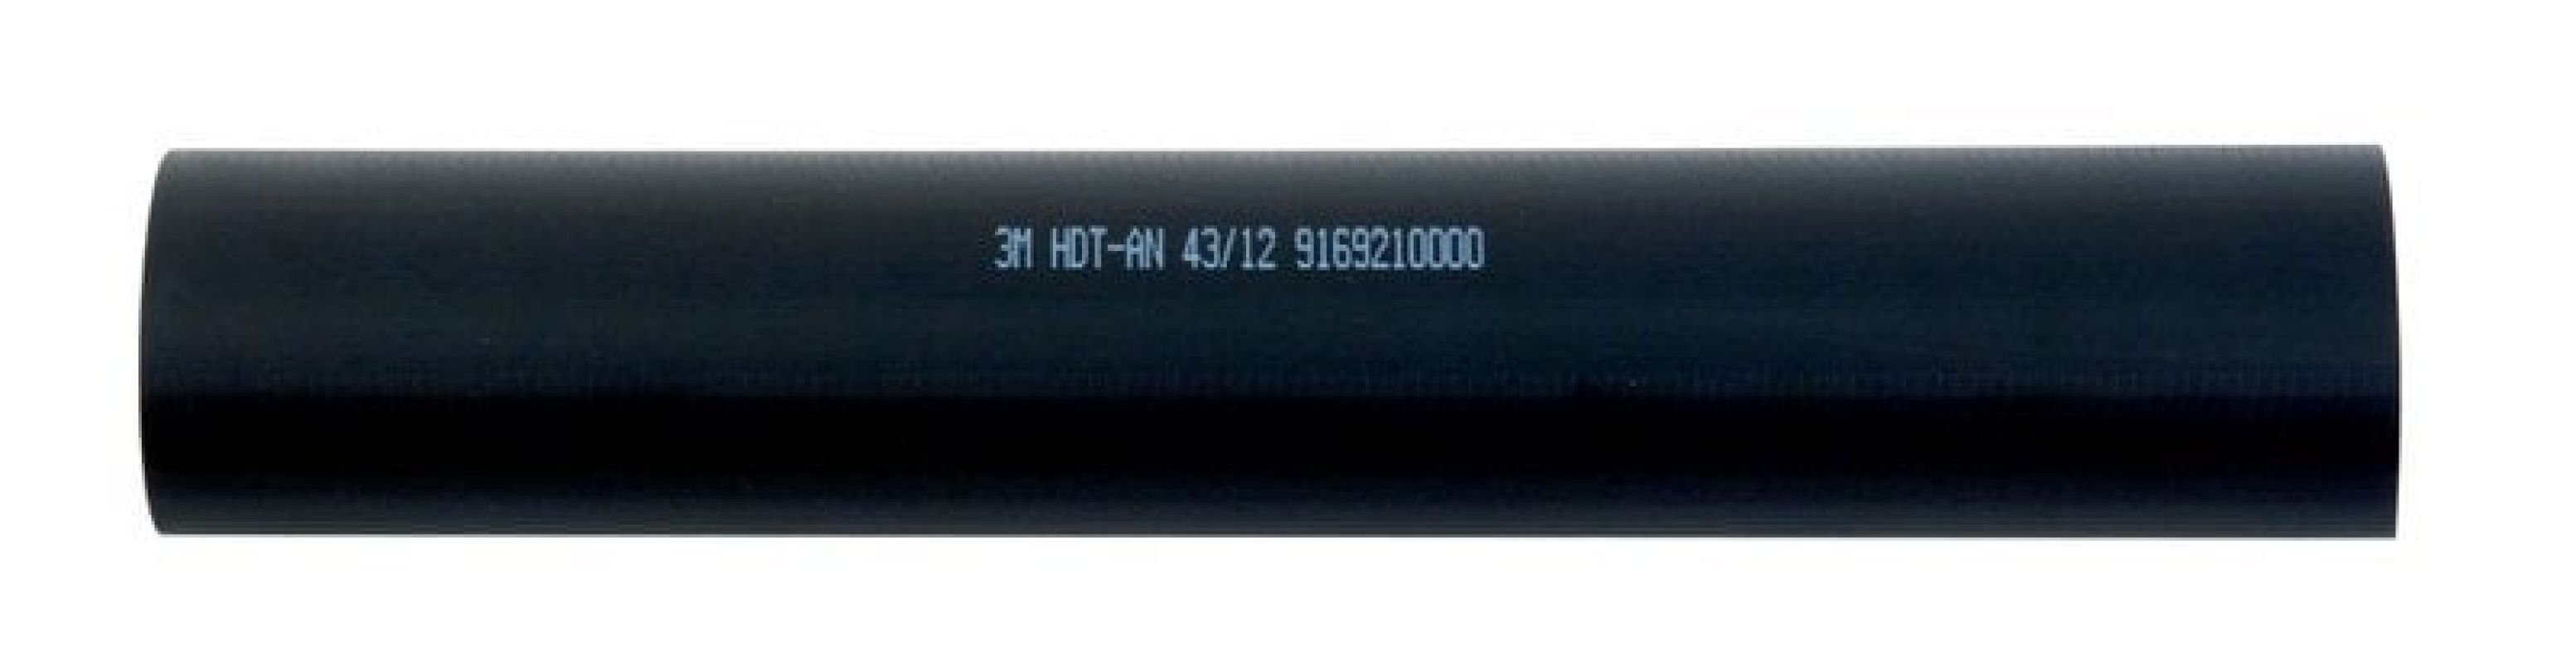 3M™ HDT-AN Heat Shrink Tubing, Polyolefin with Adhesive, Black, 43.0/12.0 mm, 1 m Piece